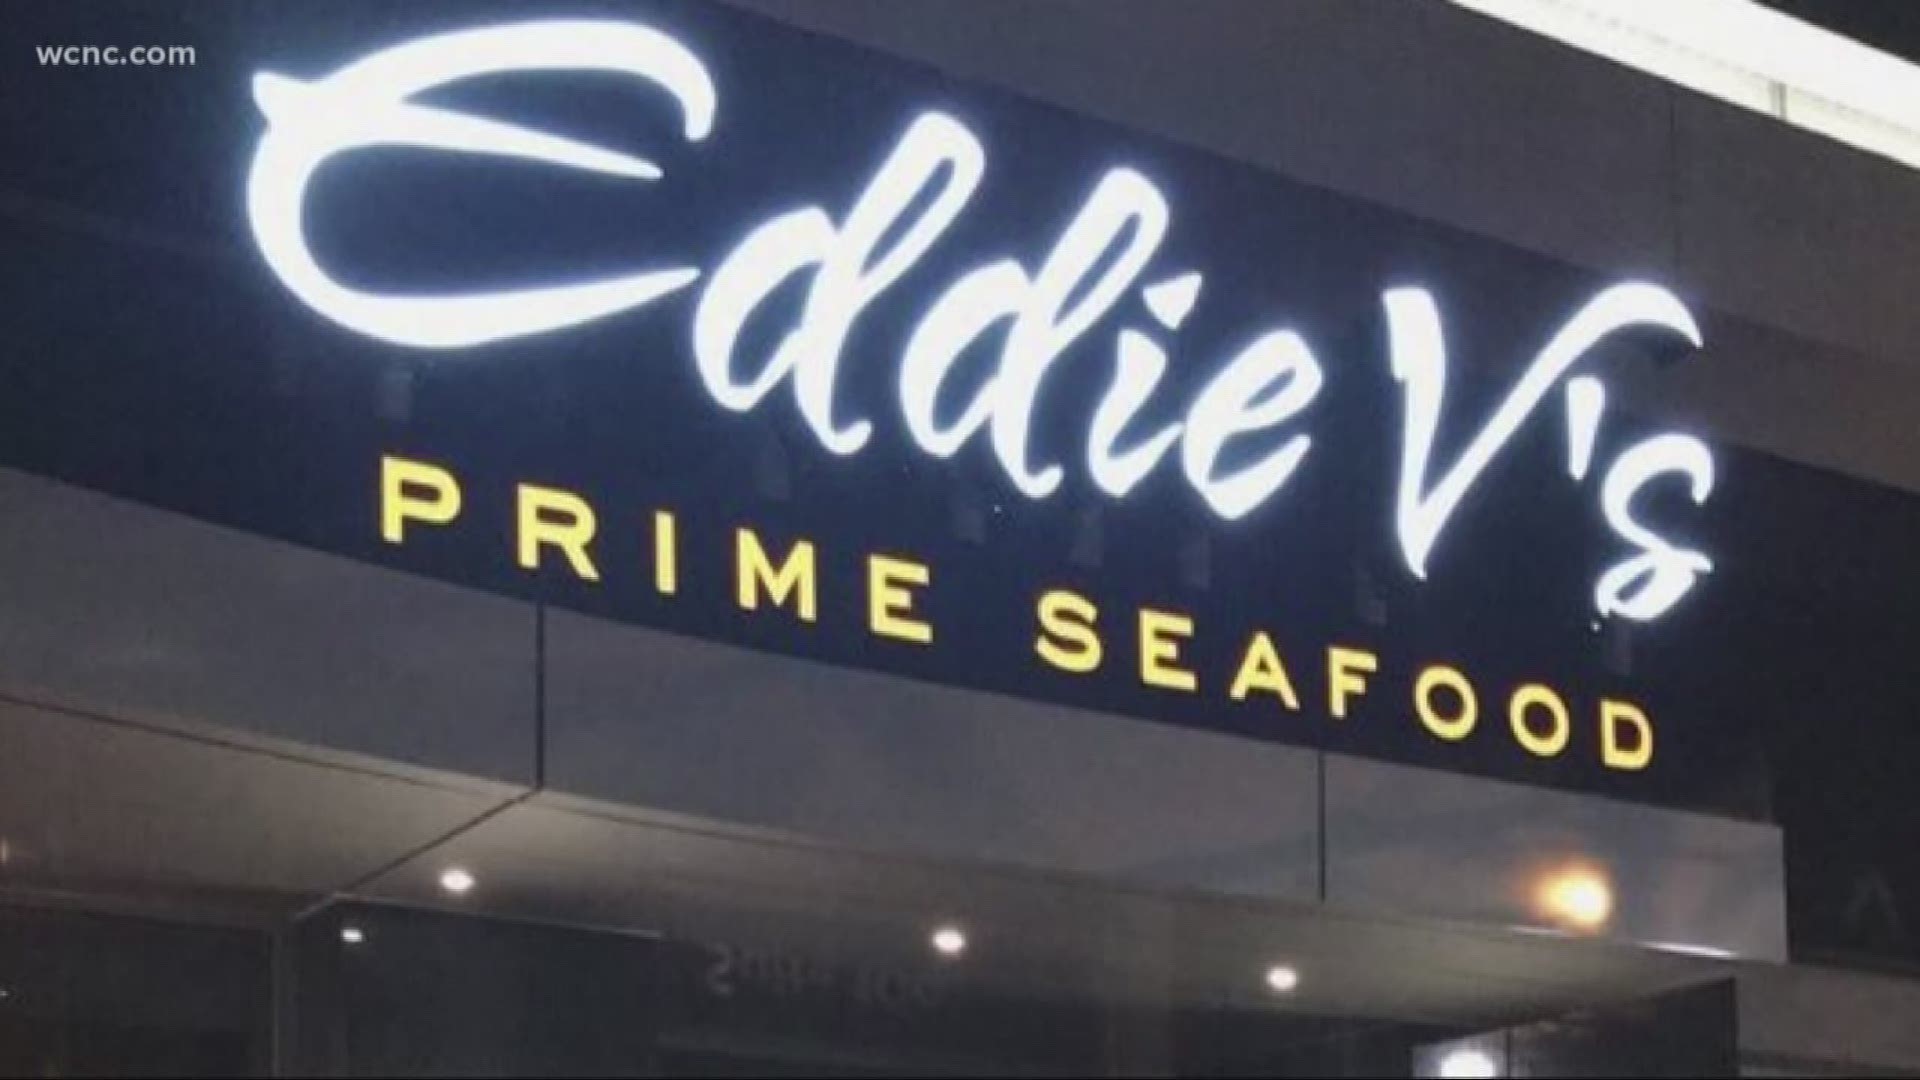 Popular uptown seafood spot, Eddie V's joining the list for the very first time with a low 'B'. The Waffle House on Arrowood Road also recieved a 'B'.